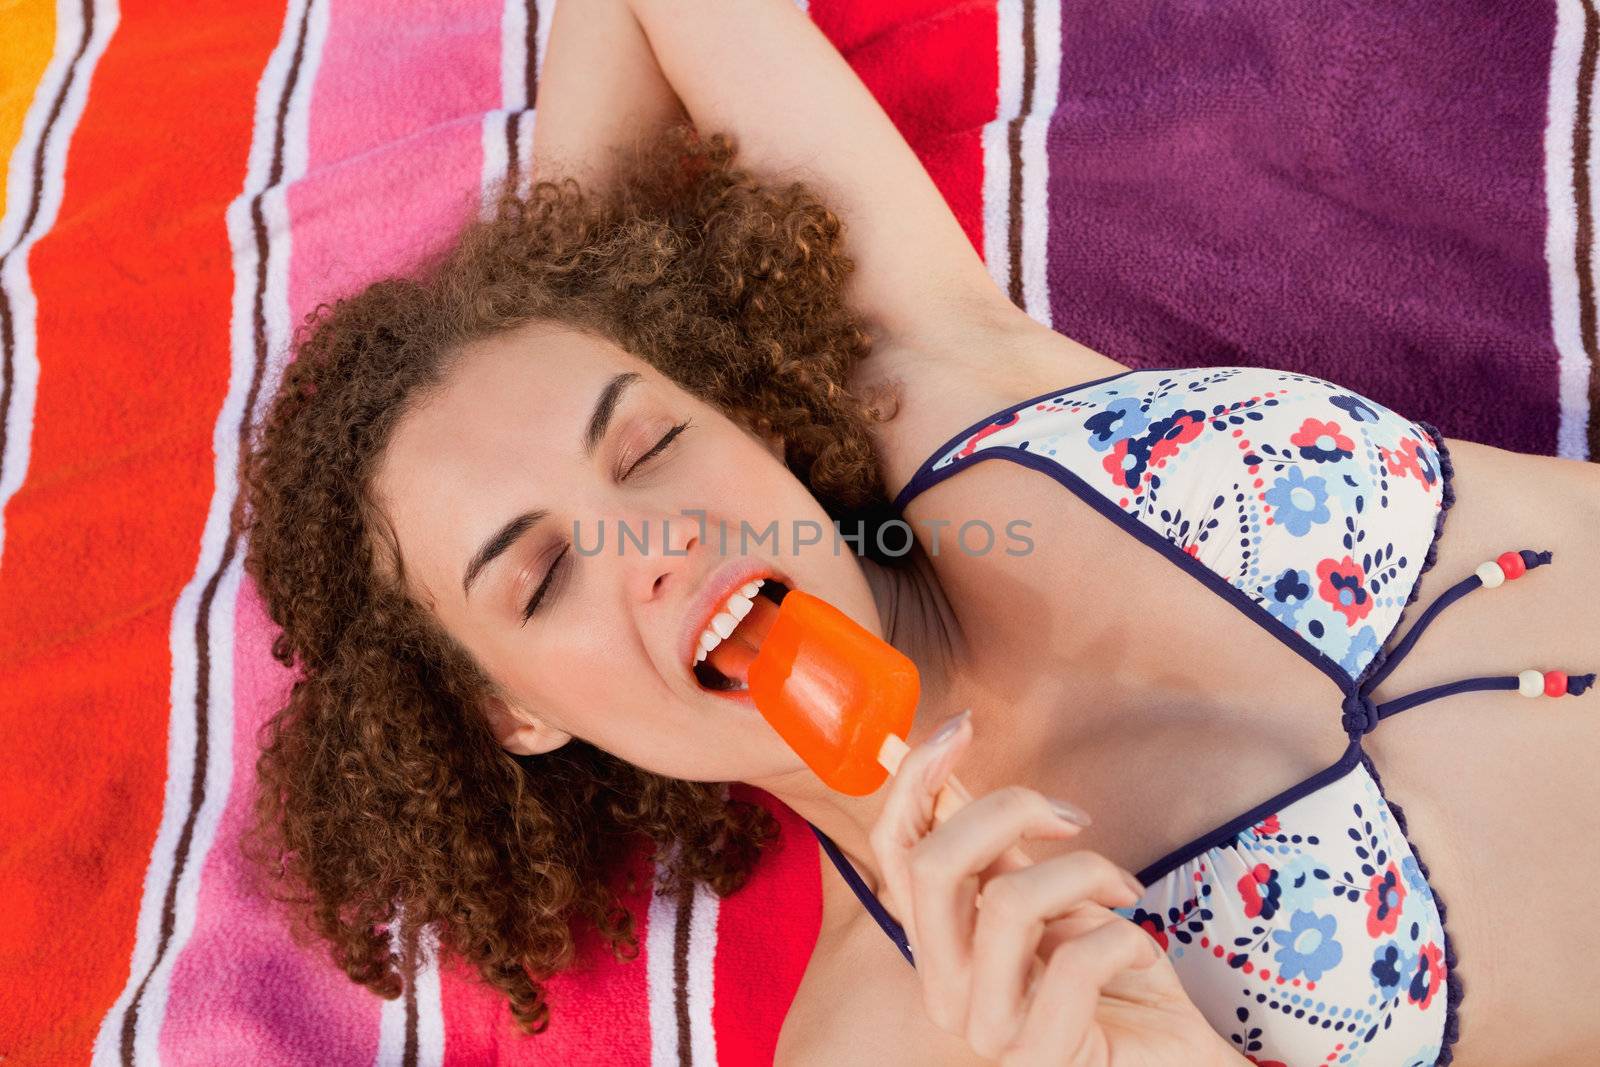 Young beautiful woman looking relaxed while eating a delicious orange ice lolly